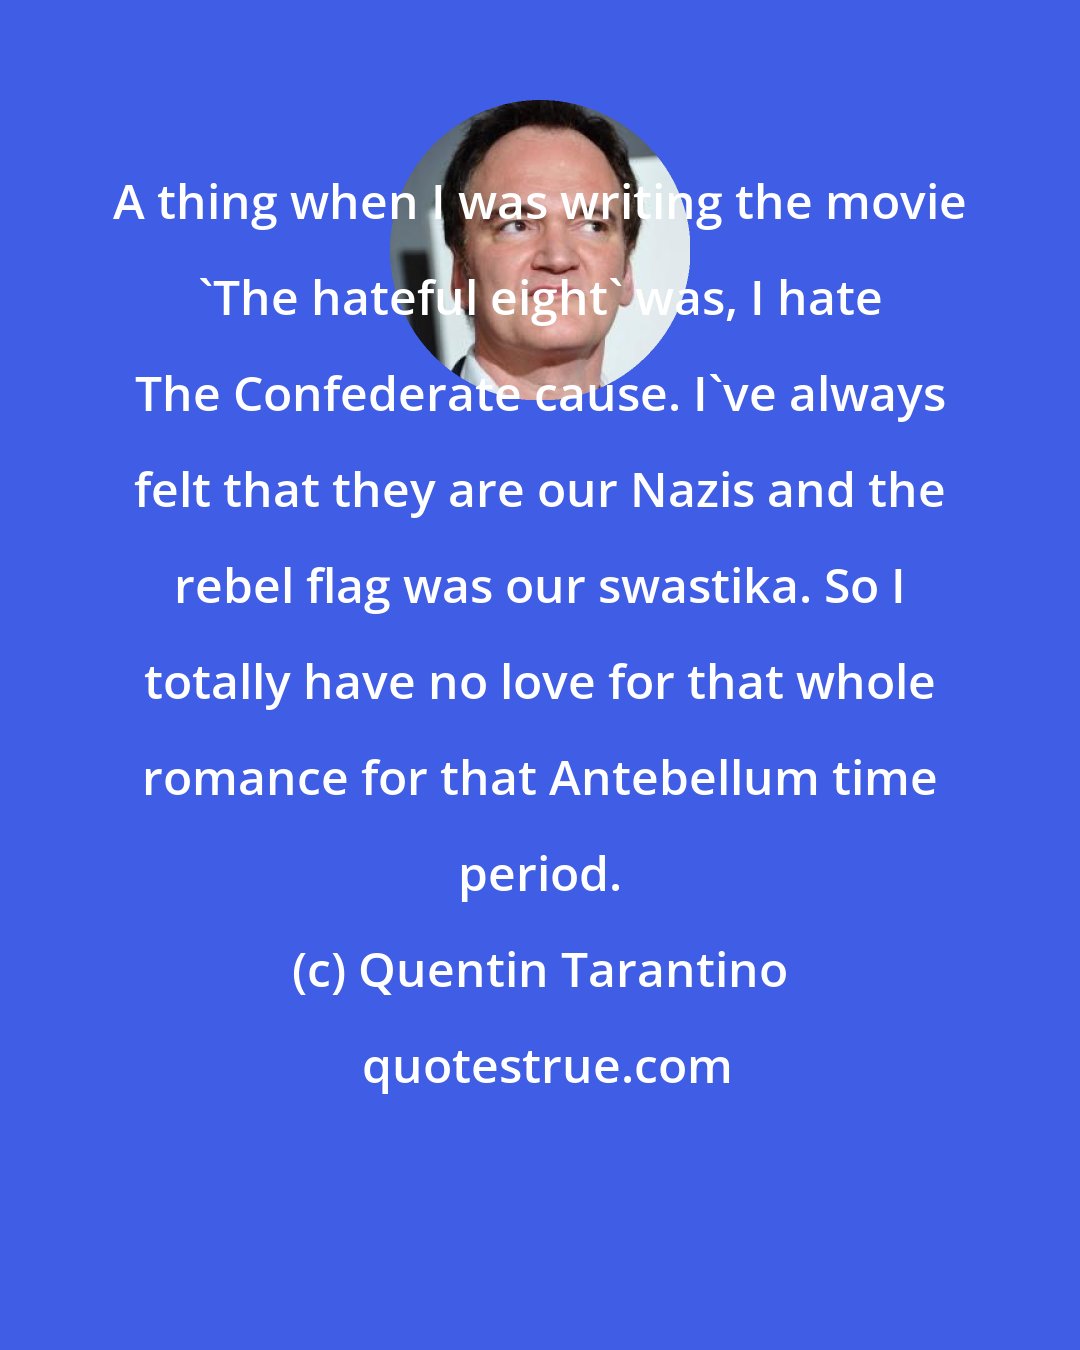 Quentin Tarantino: A thing when I was writing the movie 'The hateful eight' was, I hate The Confederate cause. I've always felt that they are our Nazis and the rebel flag was our swastika. So I totally have no love for that whole romance for that Antebellum time period.